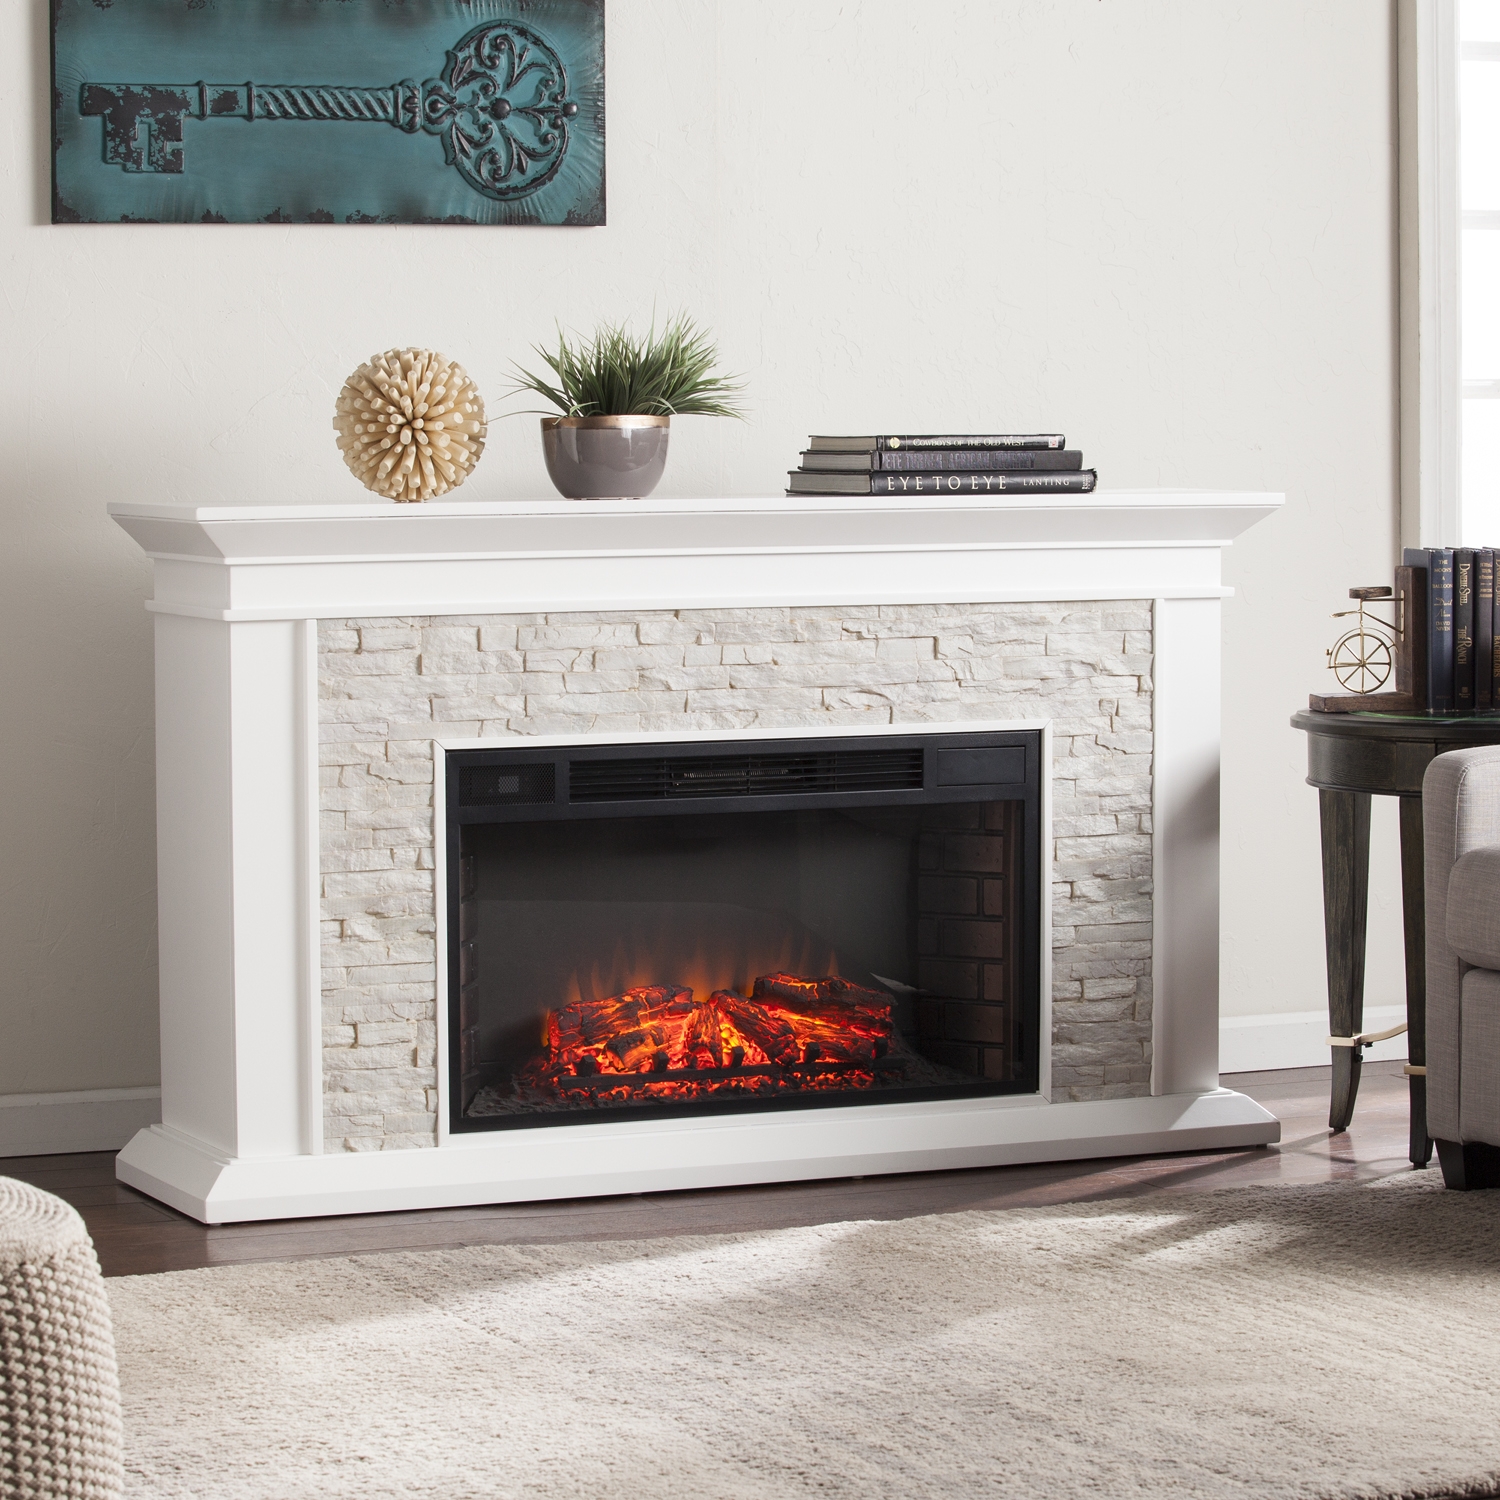 Olympia Fireplace and Spa Best Of White Fireplace Electric Charming Fireplace